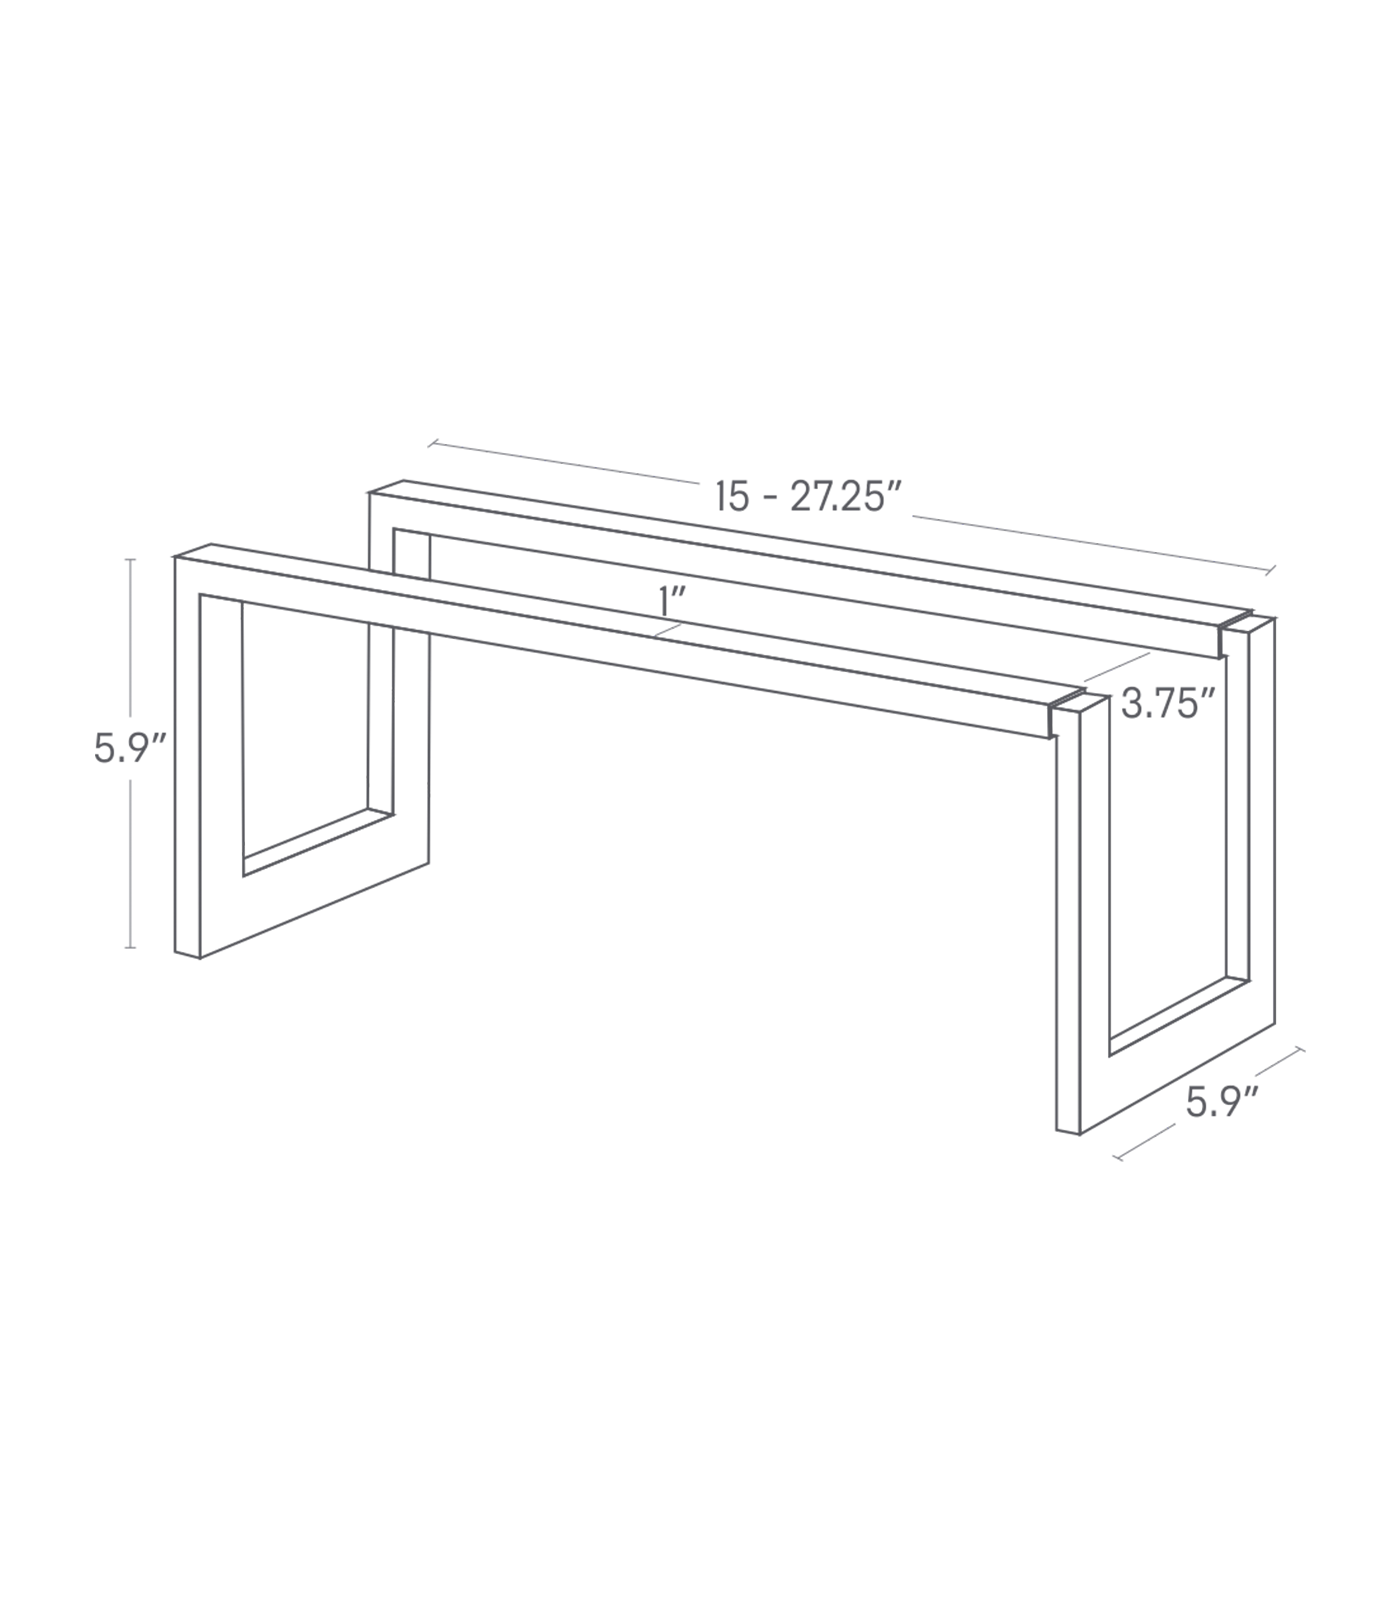 Dimension image for Expandable Shoe Rack - Two Sizes on a white background including dimensions  L 5.91 x W 14.96 x H 5.91 inches